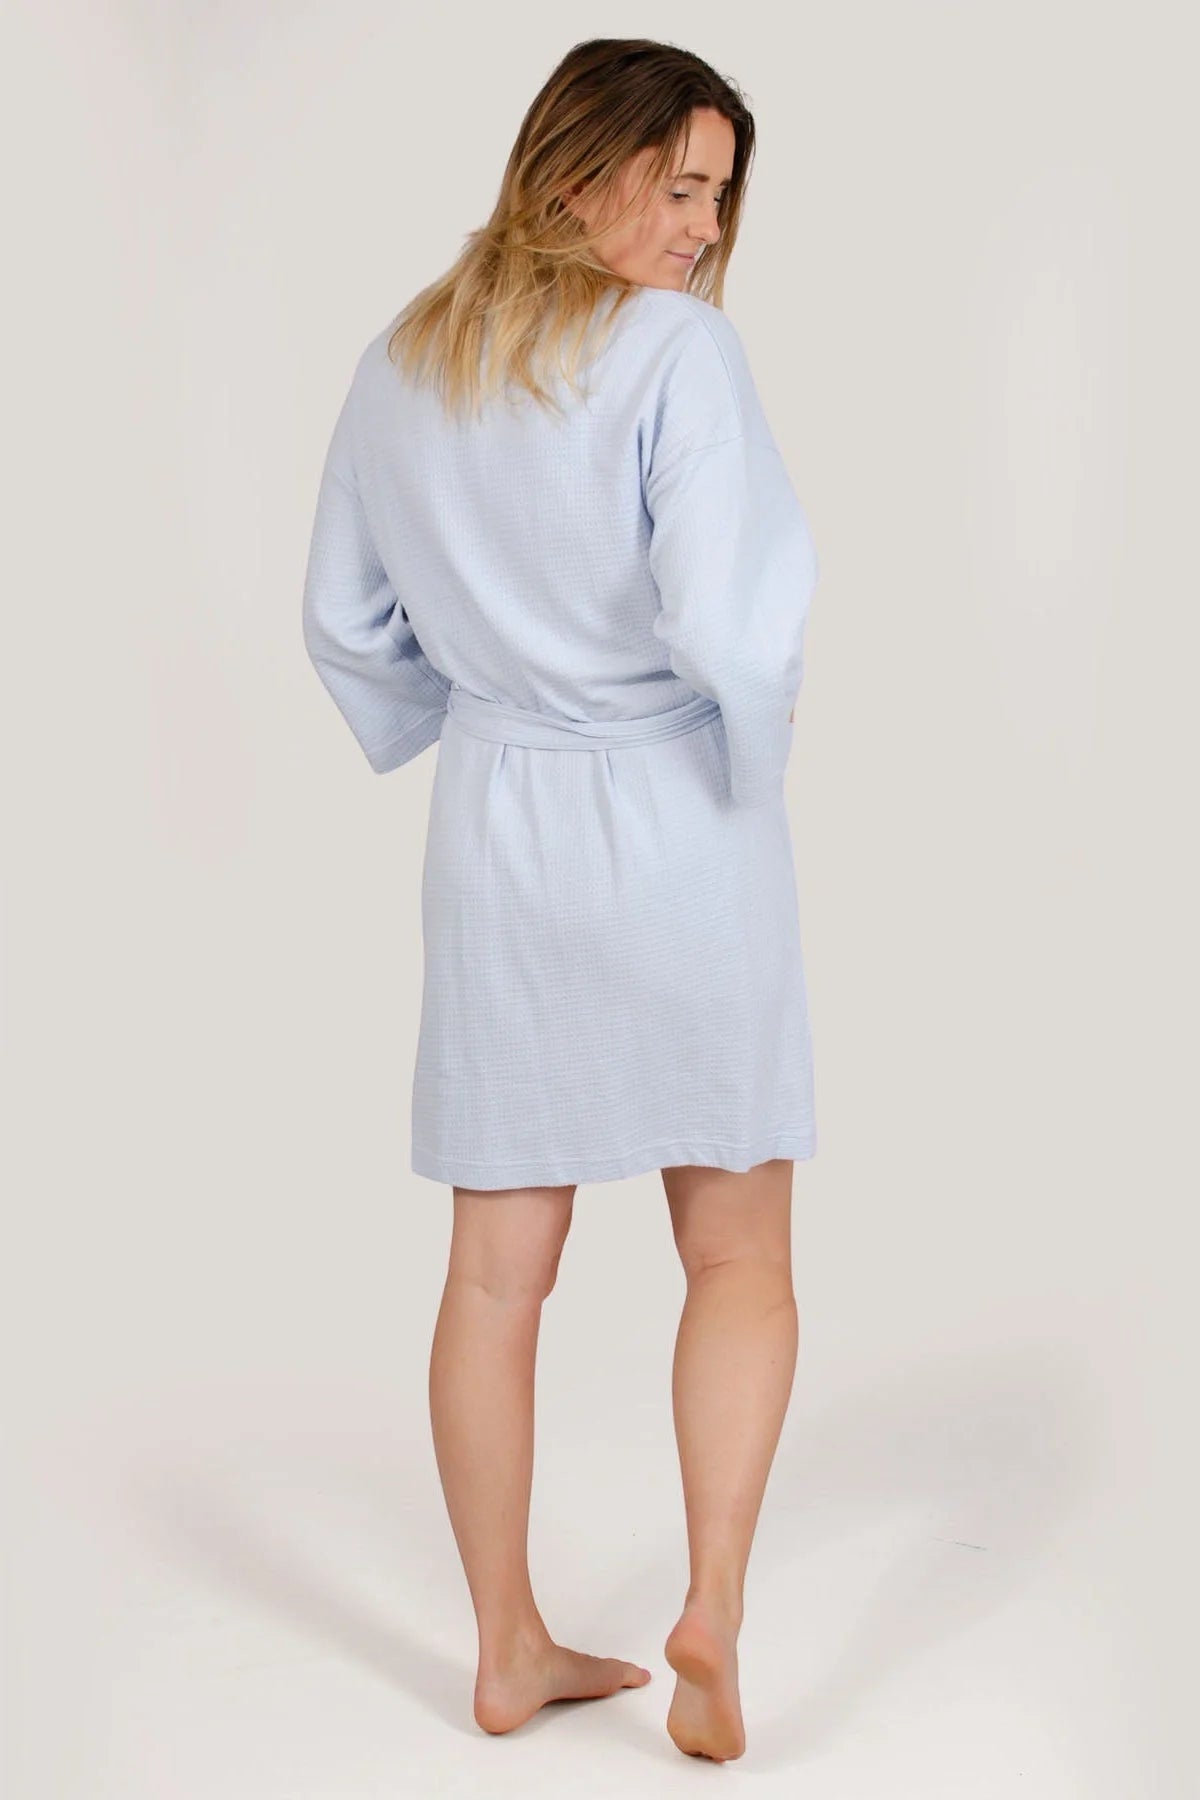 M&S Cotton Waffle Summer Dressing Gown